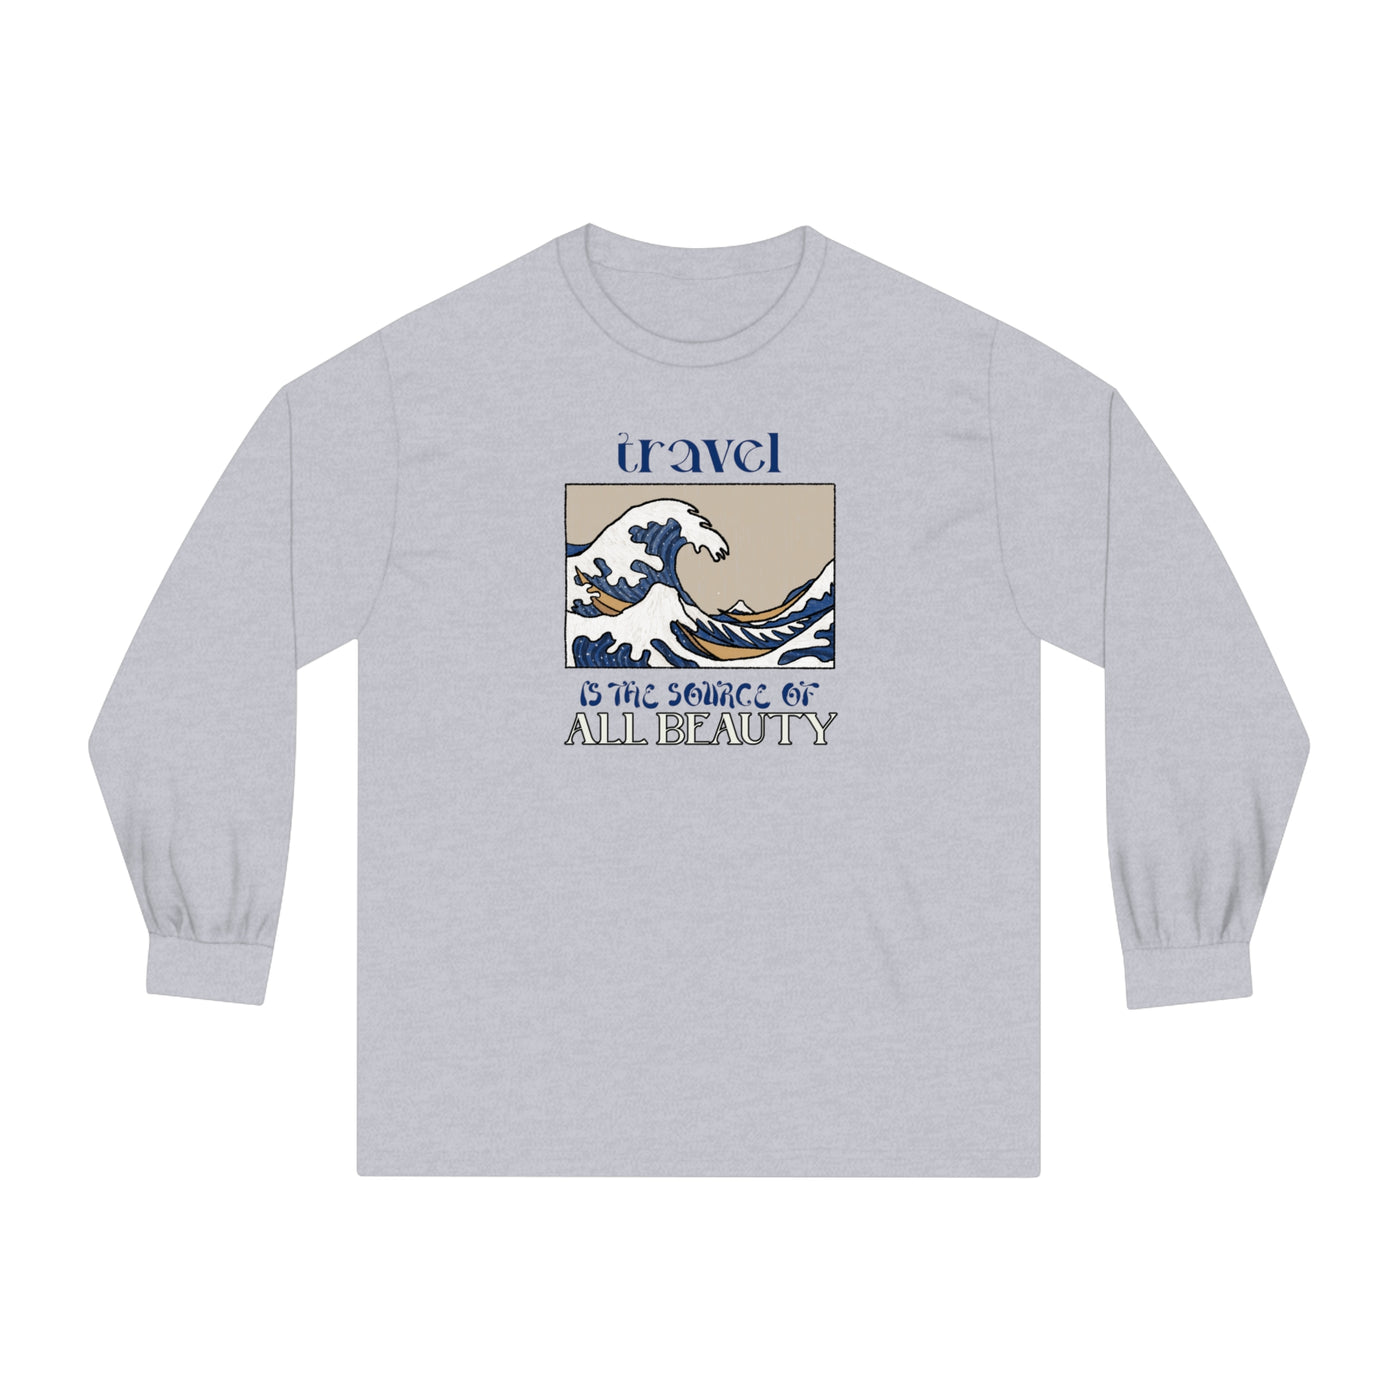 Travel is the source of all beauty Unisex Classic Long Sleeve T-Shirt